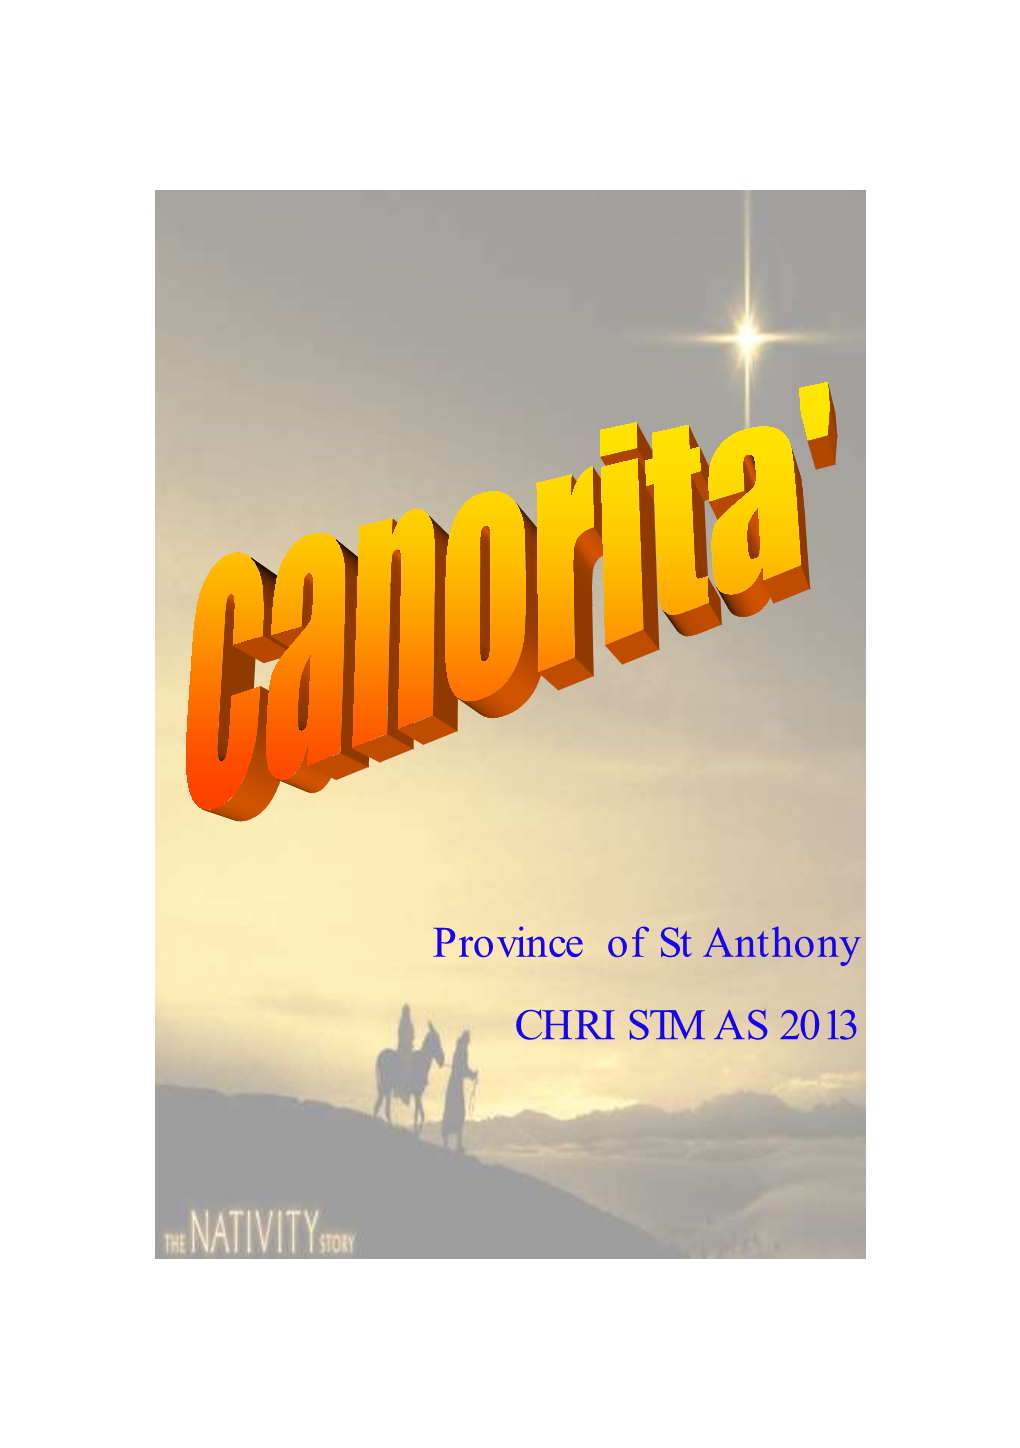 Province of St Anthony CHRISTMAS 2013